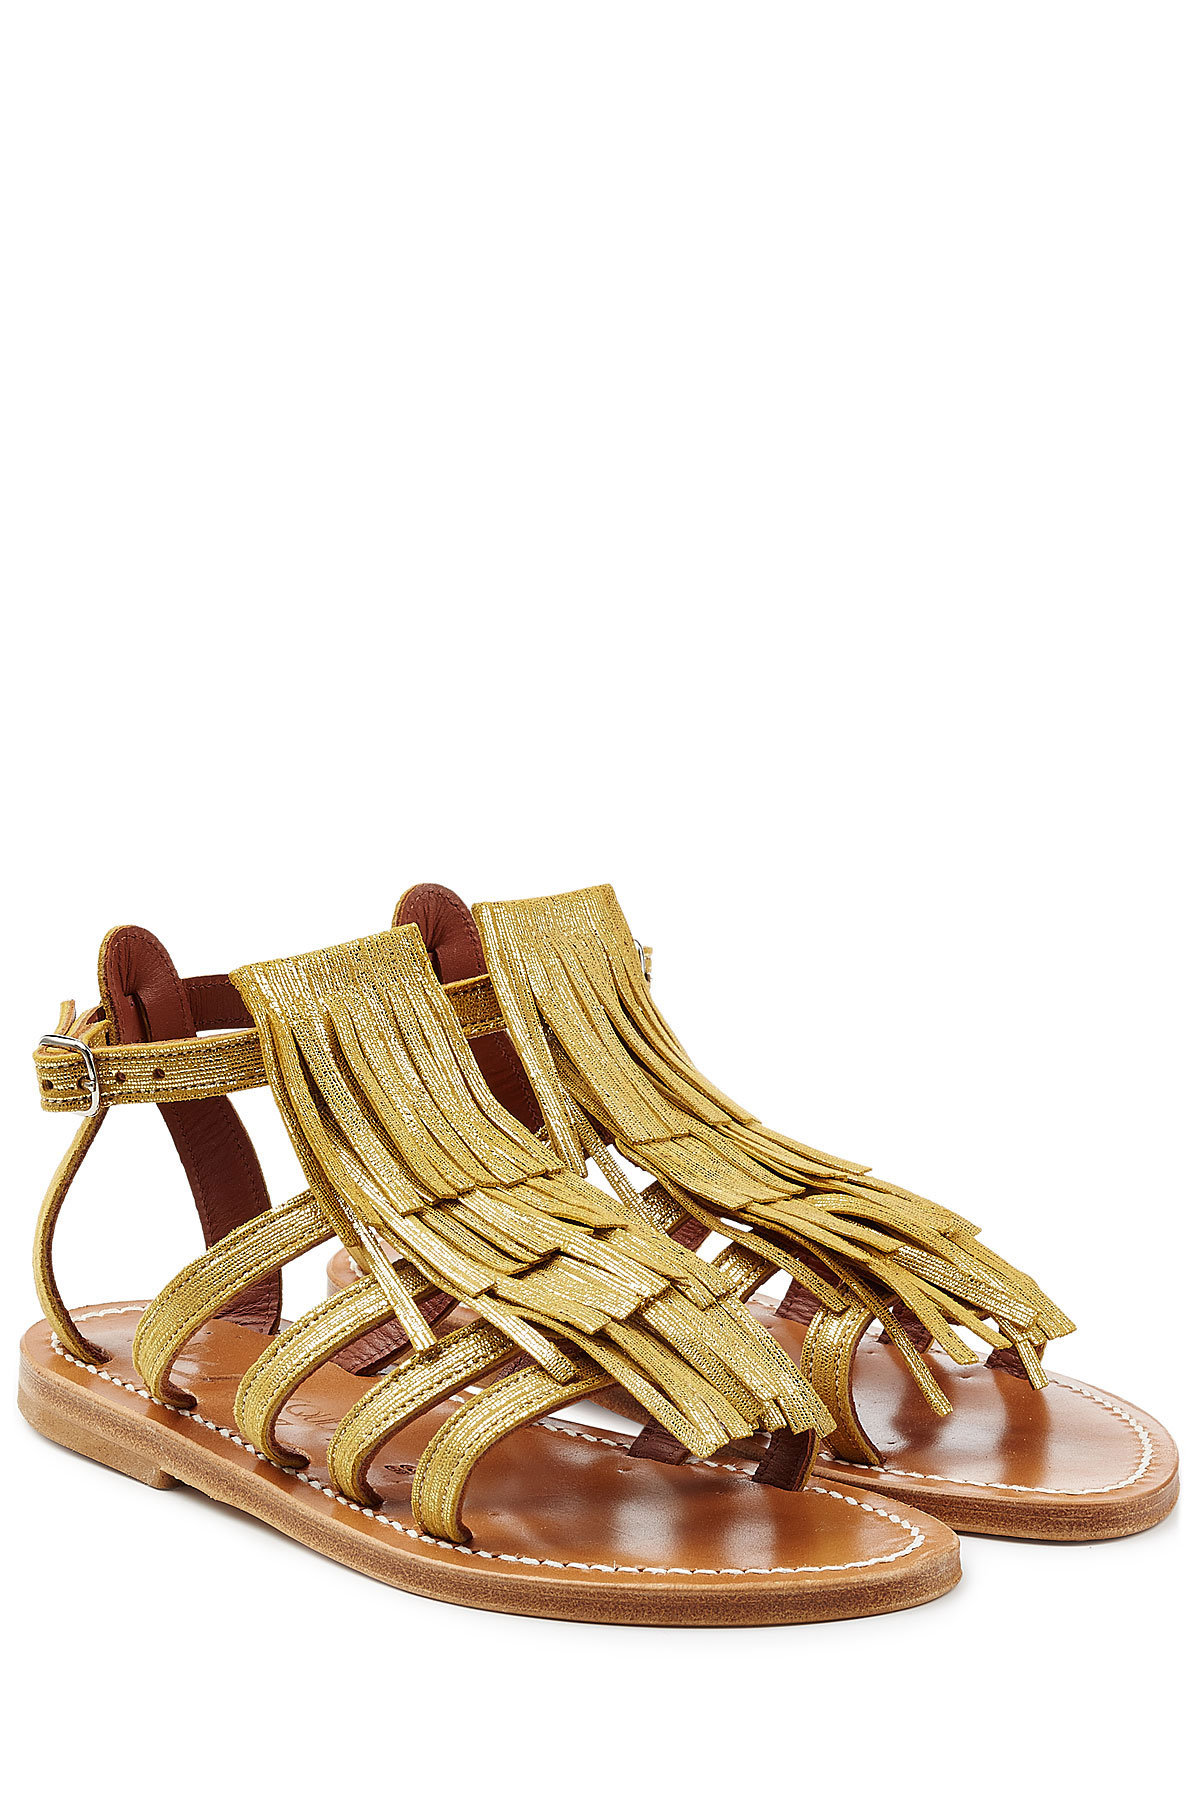 K.Jacques - Leather Sandals with Fringe